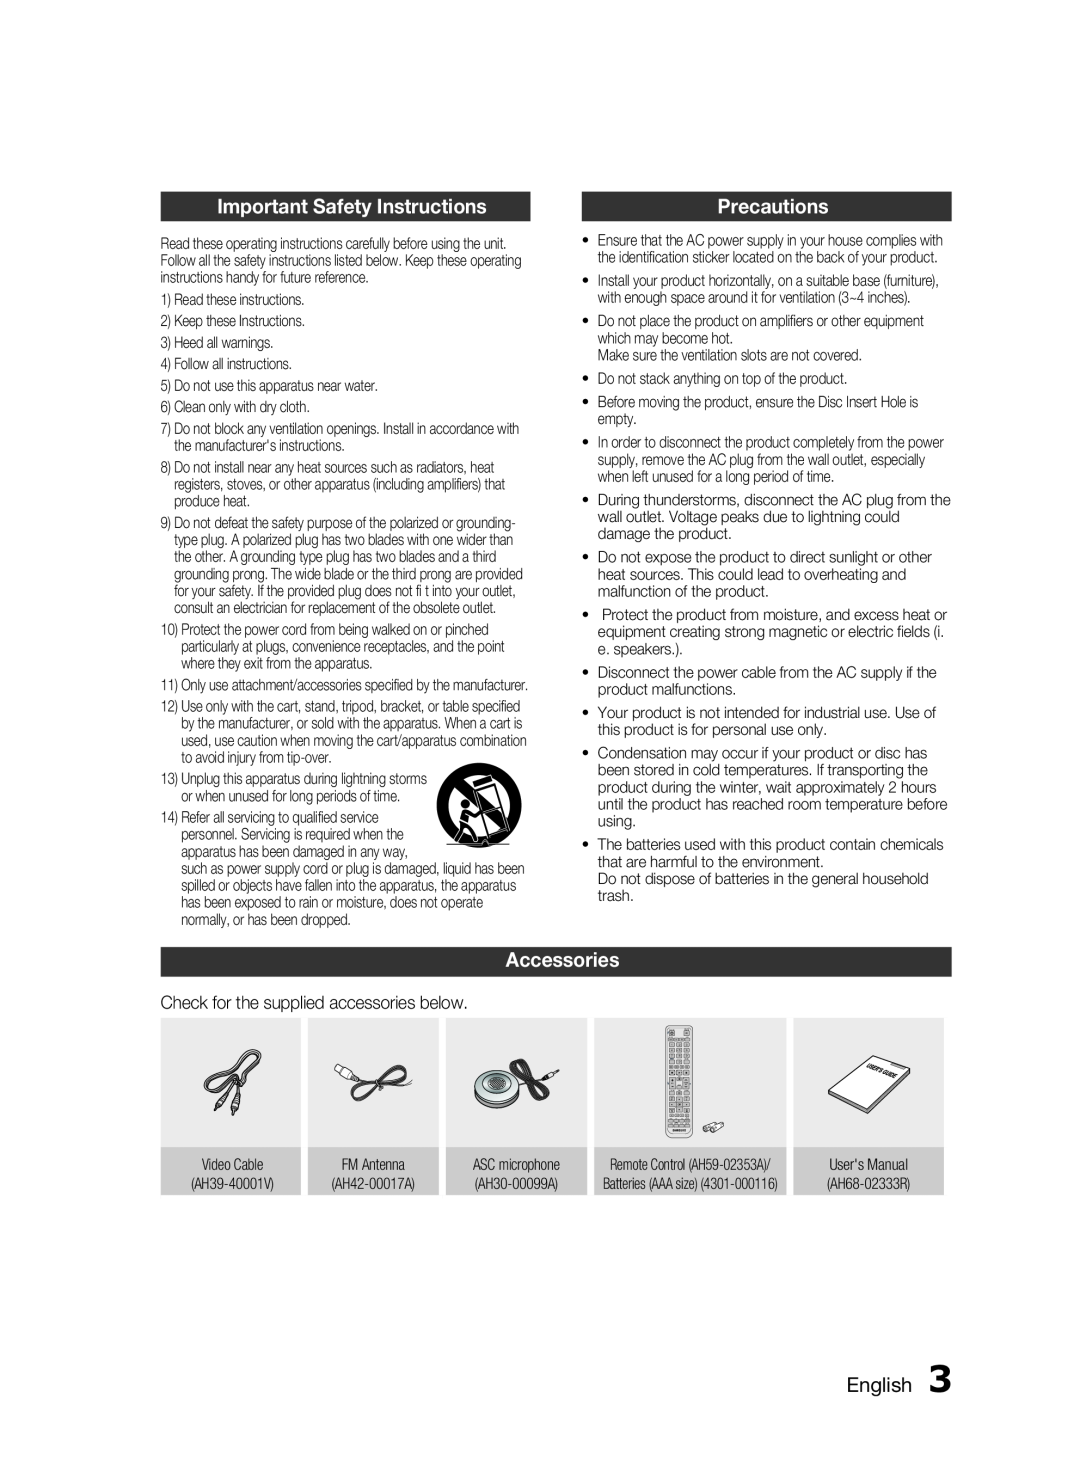 Samsung HT-D553, HT-D555, HT-D550 user manual Important Safety Instructions, Precautions, Accessories, English  